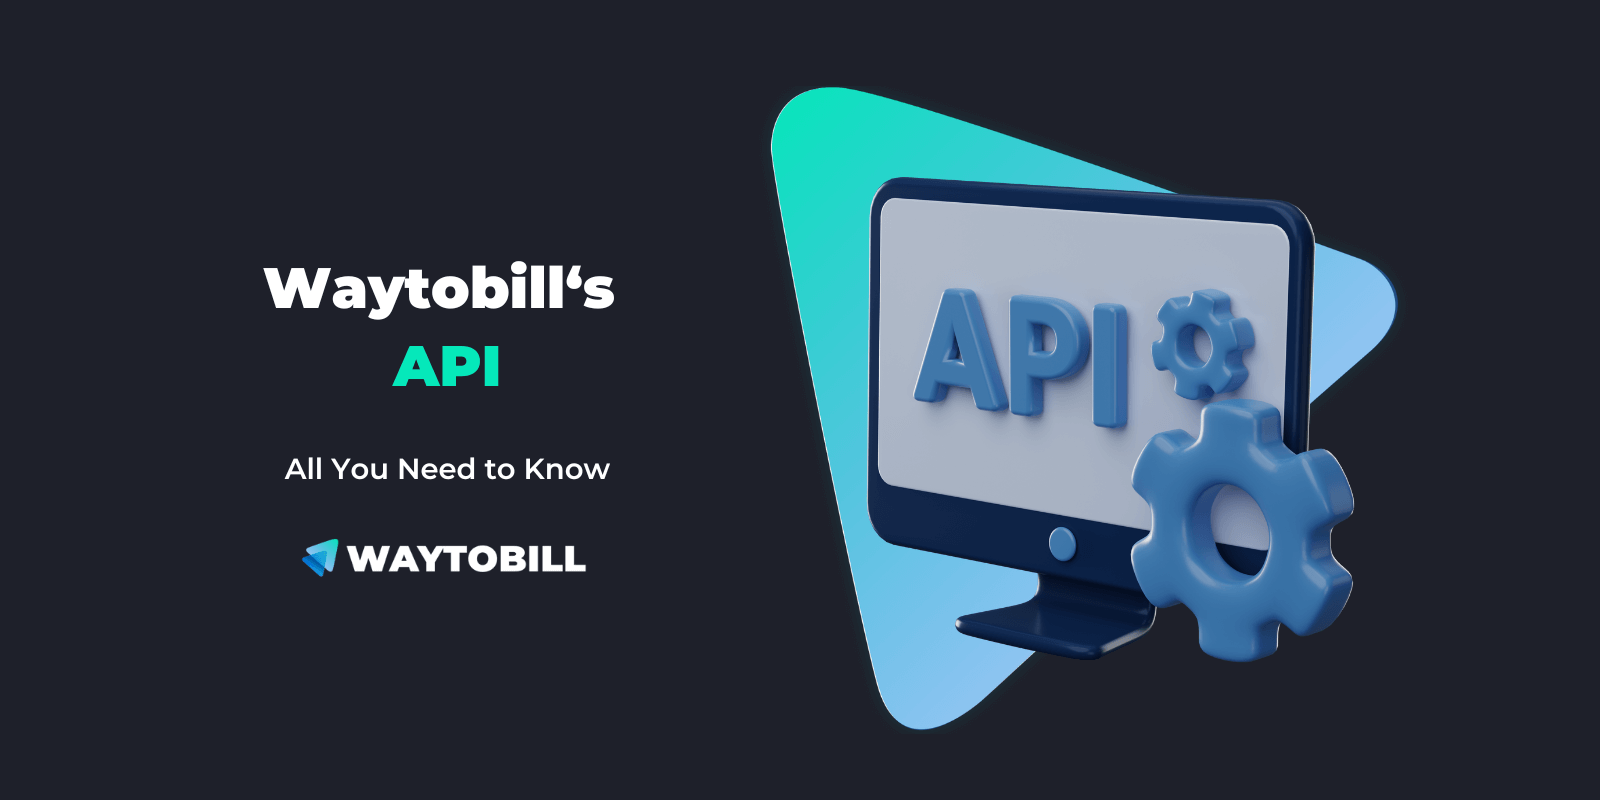 All You Need to Know About Waytobill’s API - Guide for Decision-Makers